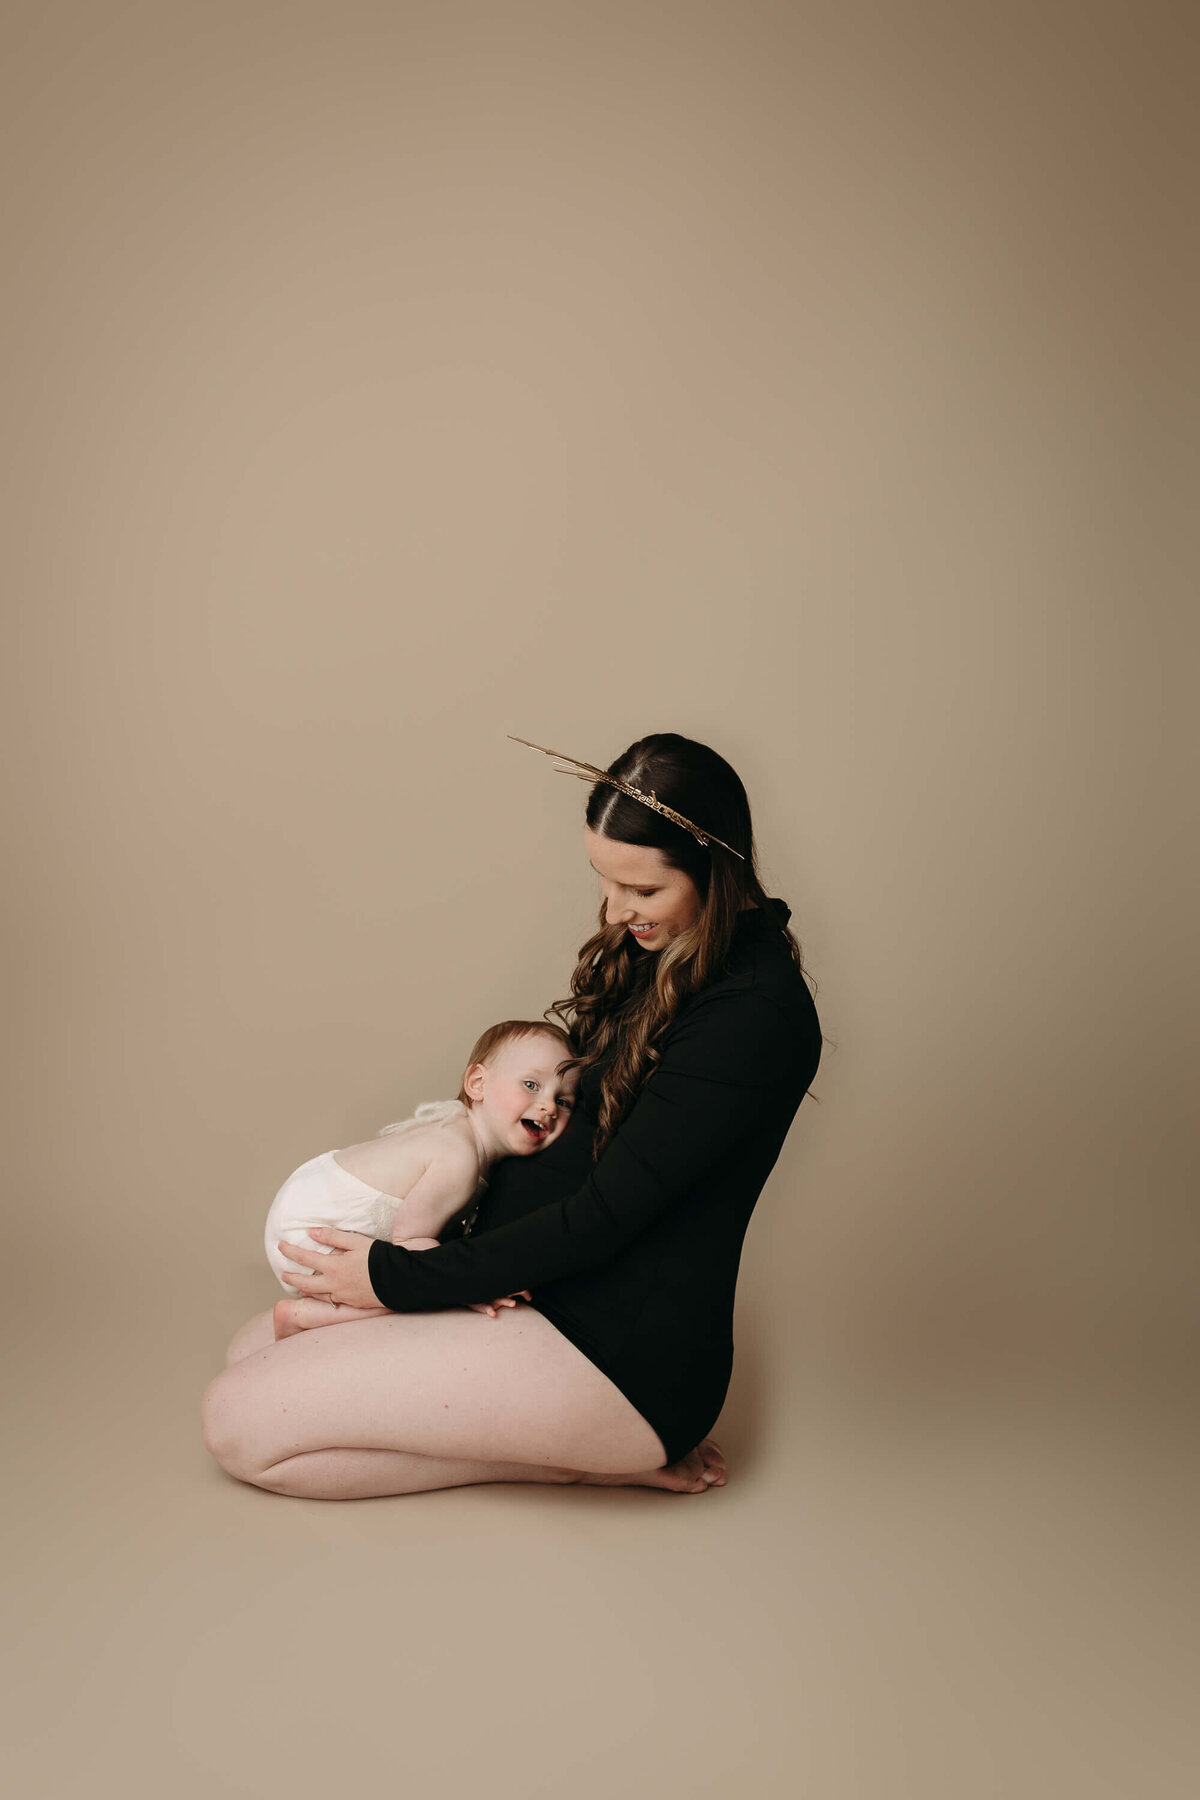 Maternity Studio Session with hair and make upWeb Res 19